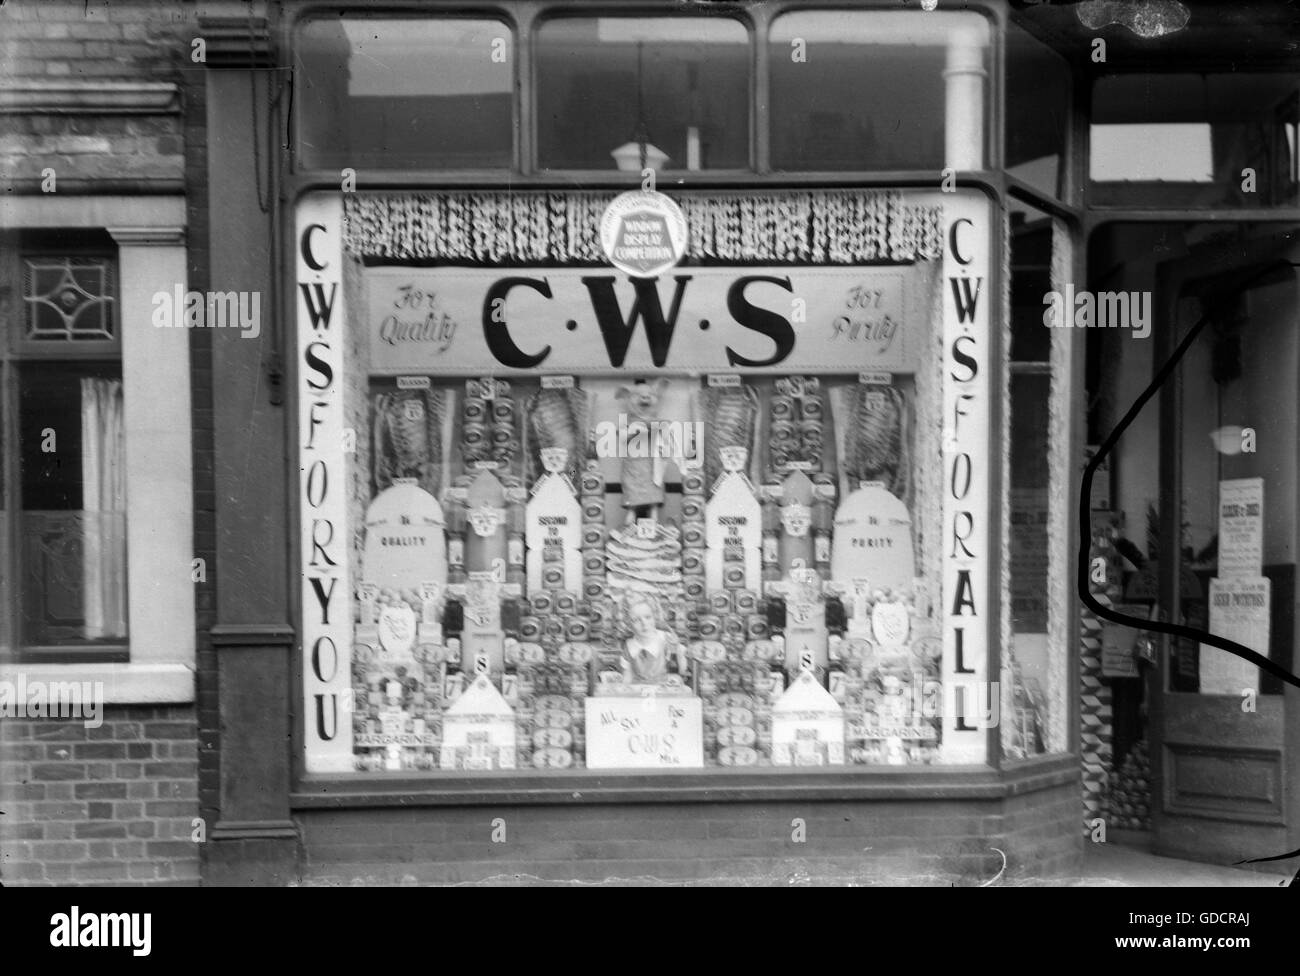 Shop Window display for The Co-op Co-operative Wholesale Society (CWS) circa 1920 in the Burton on Trent area, South Derbyshire. Photograph by Tony HenshawTony Henshaw Stock Photo